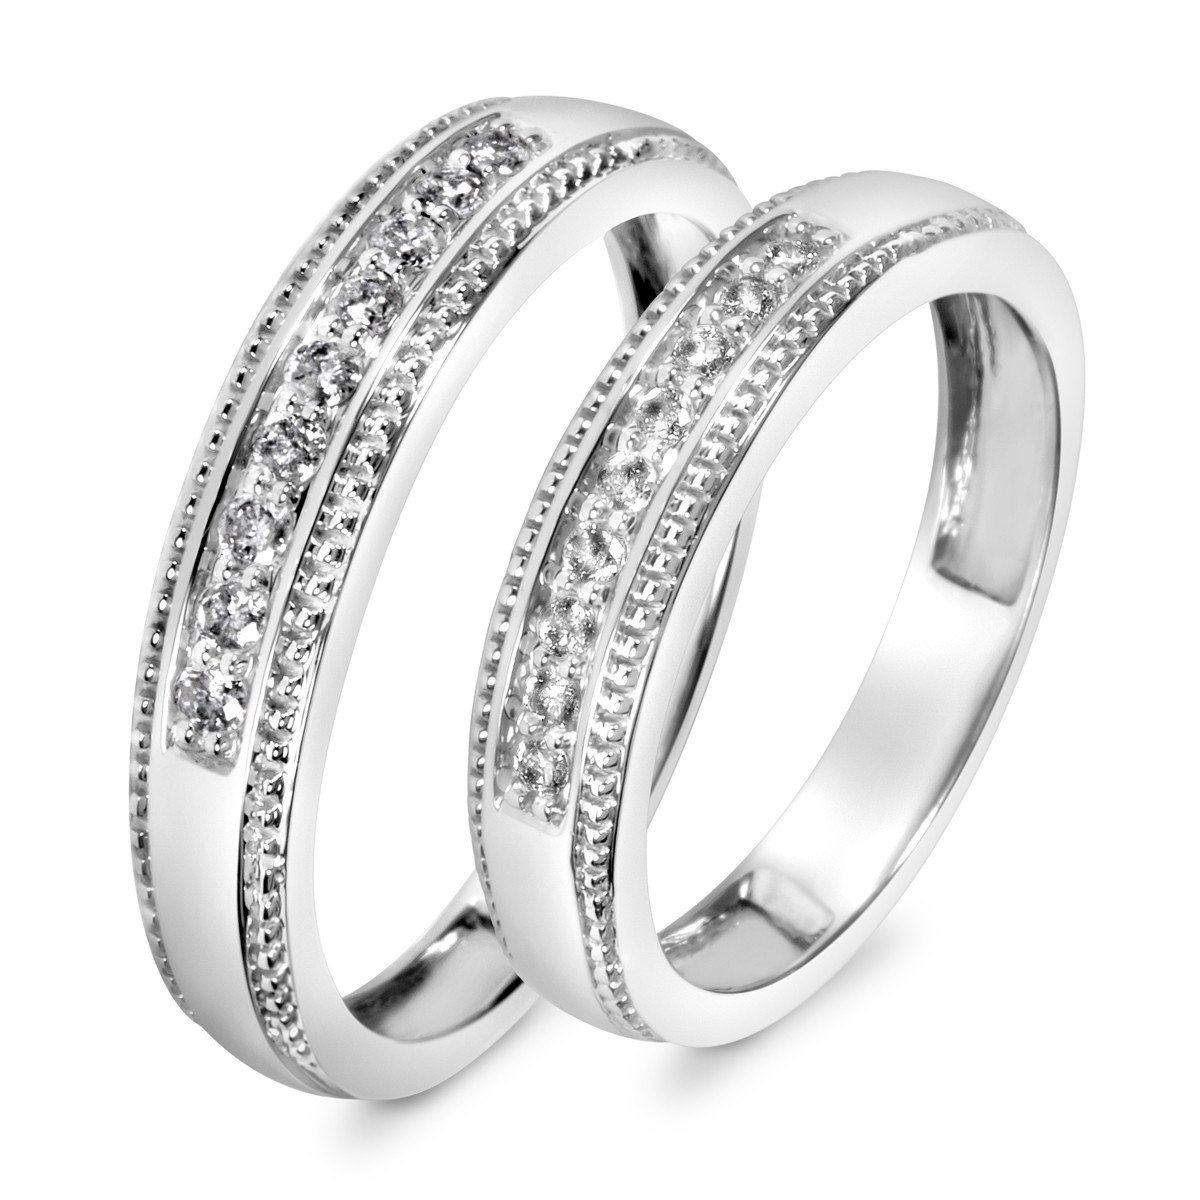 Wedding Band Sets His And Hers
 STYLE WB517W10K